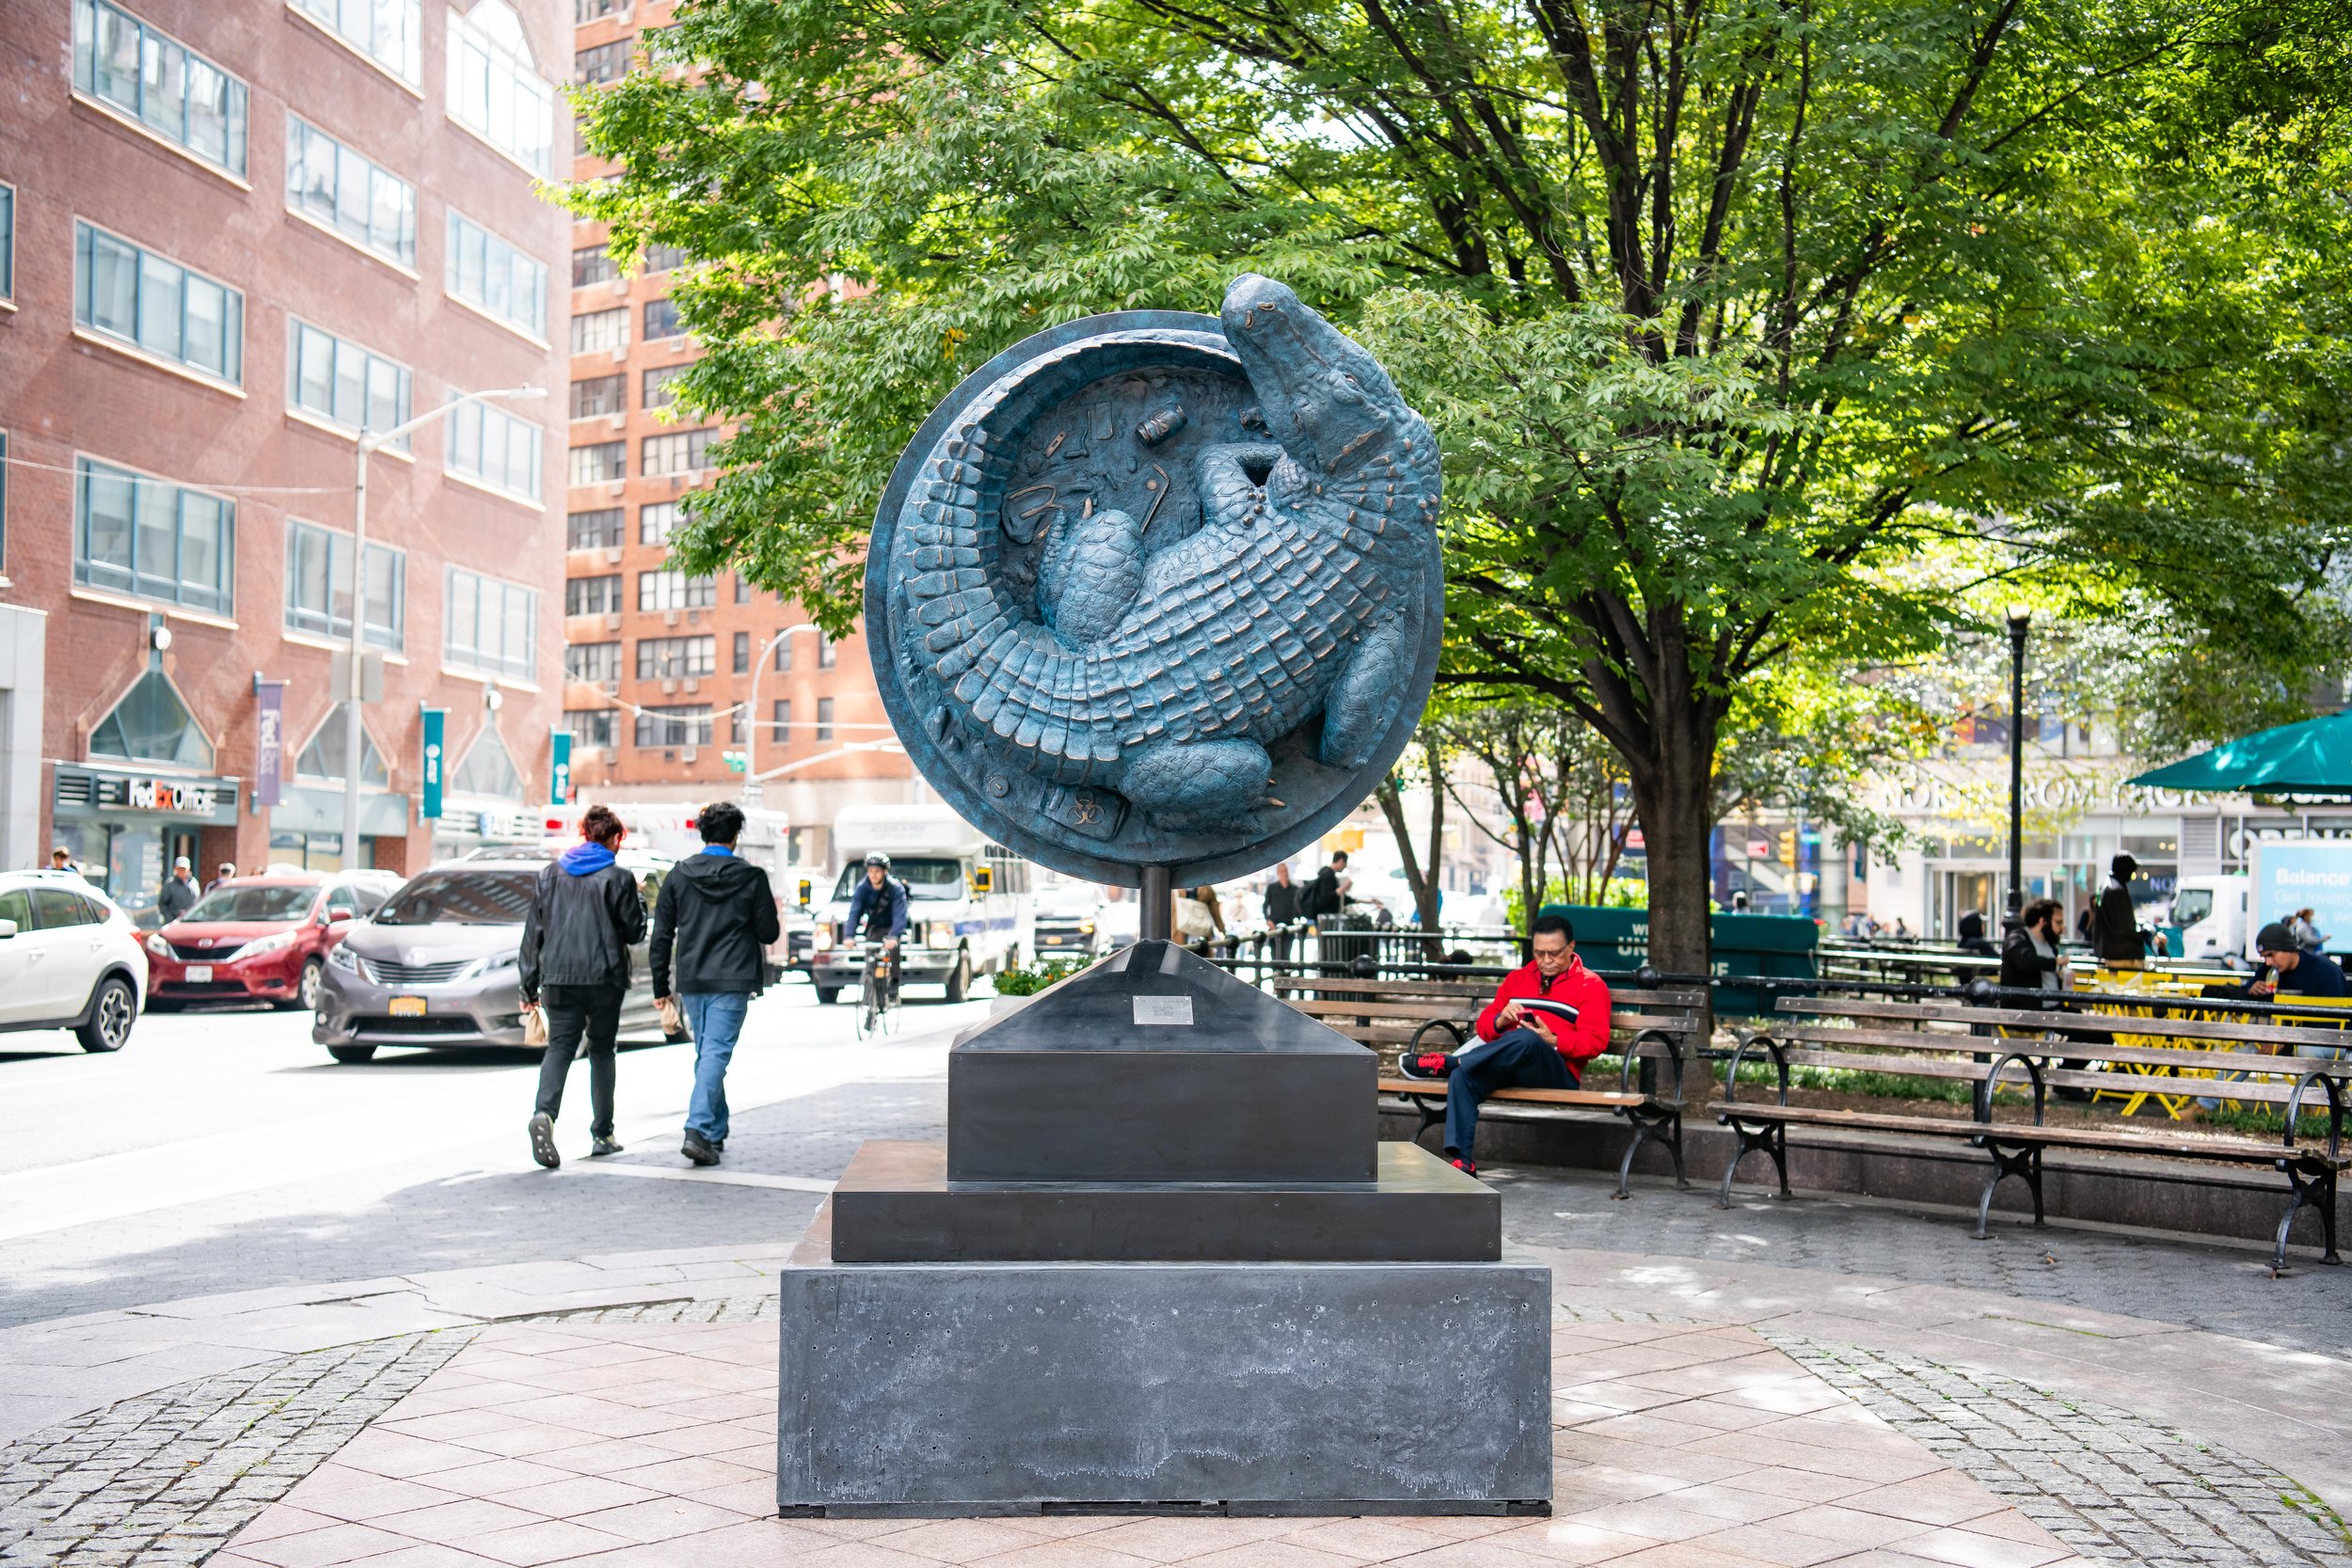 The Story of the Statues in Union Square